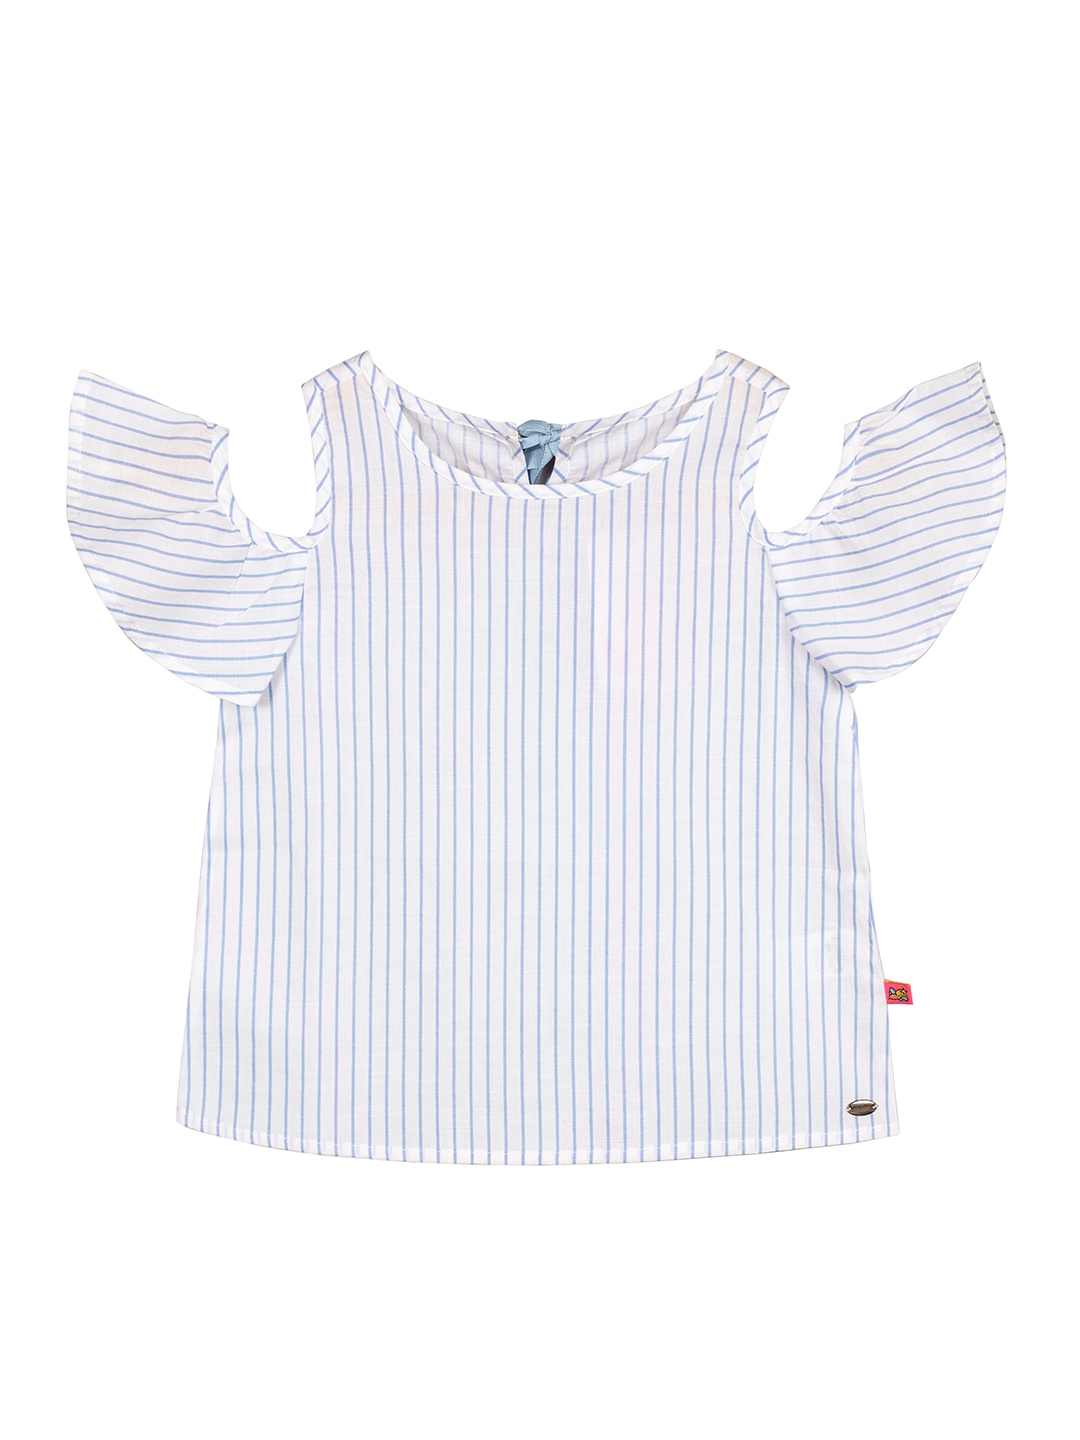 Budding Bees | White Striped Top